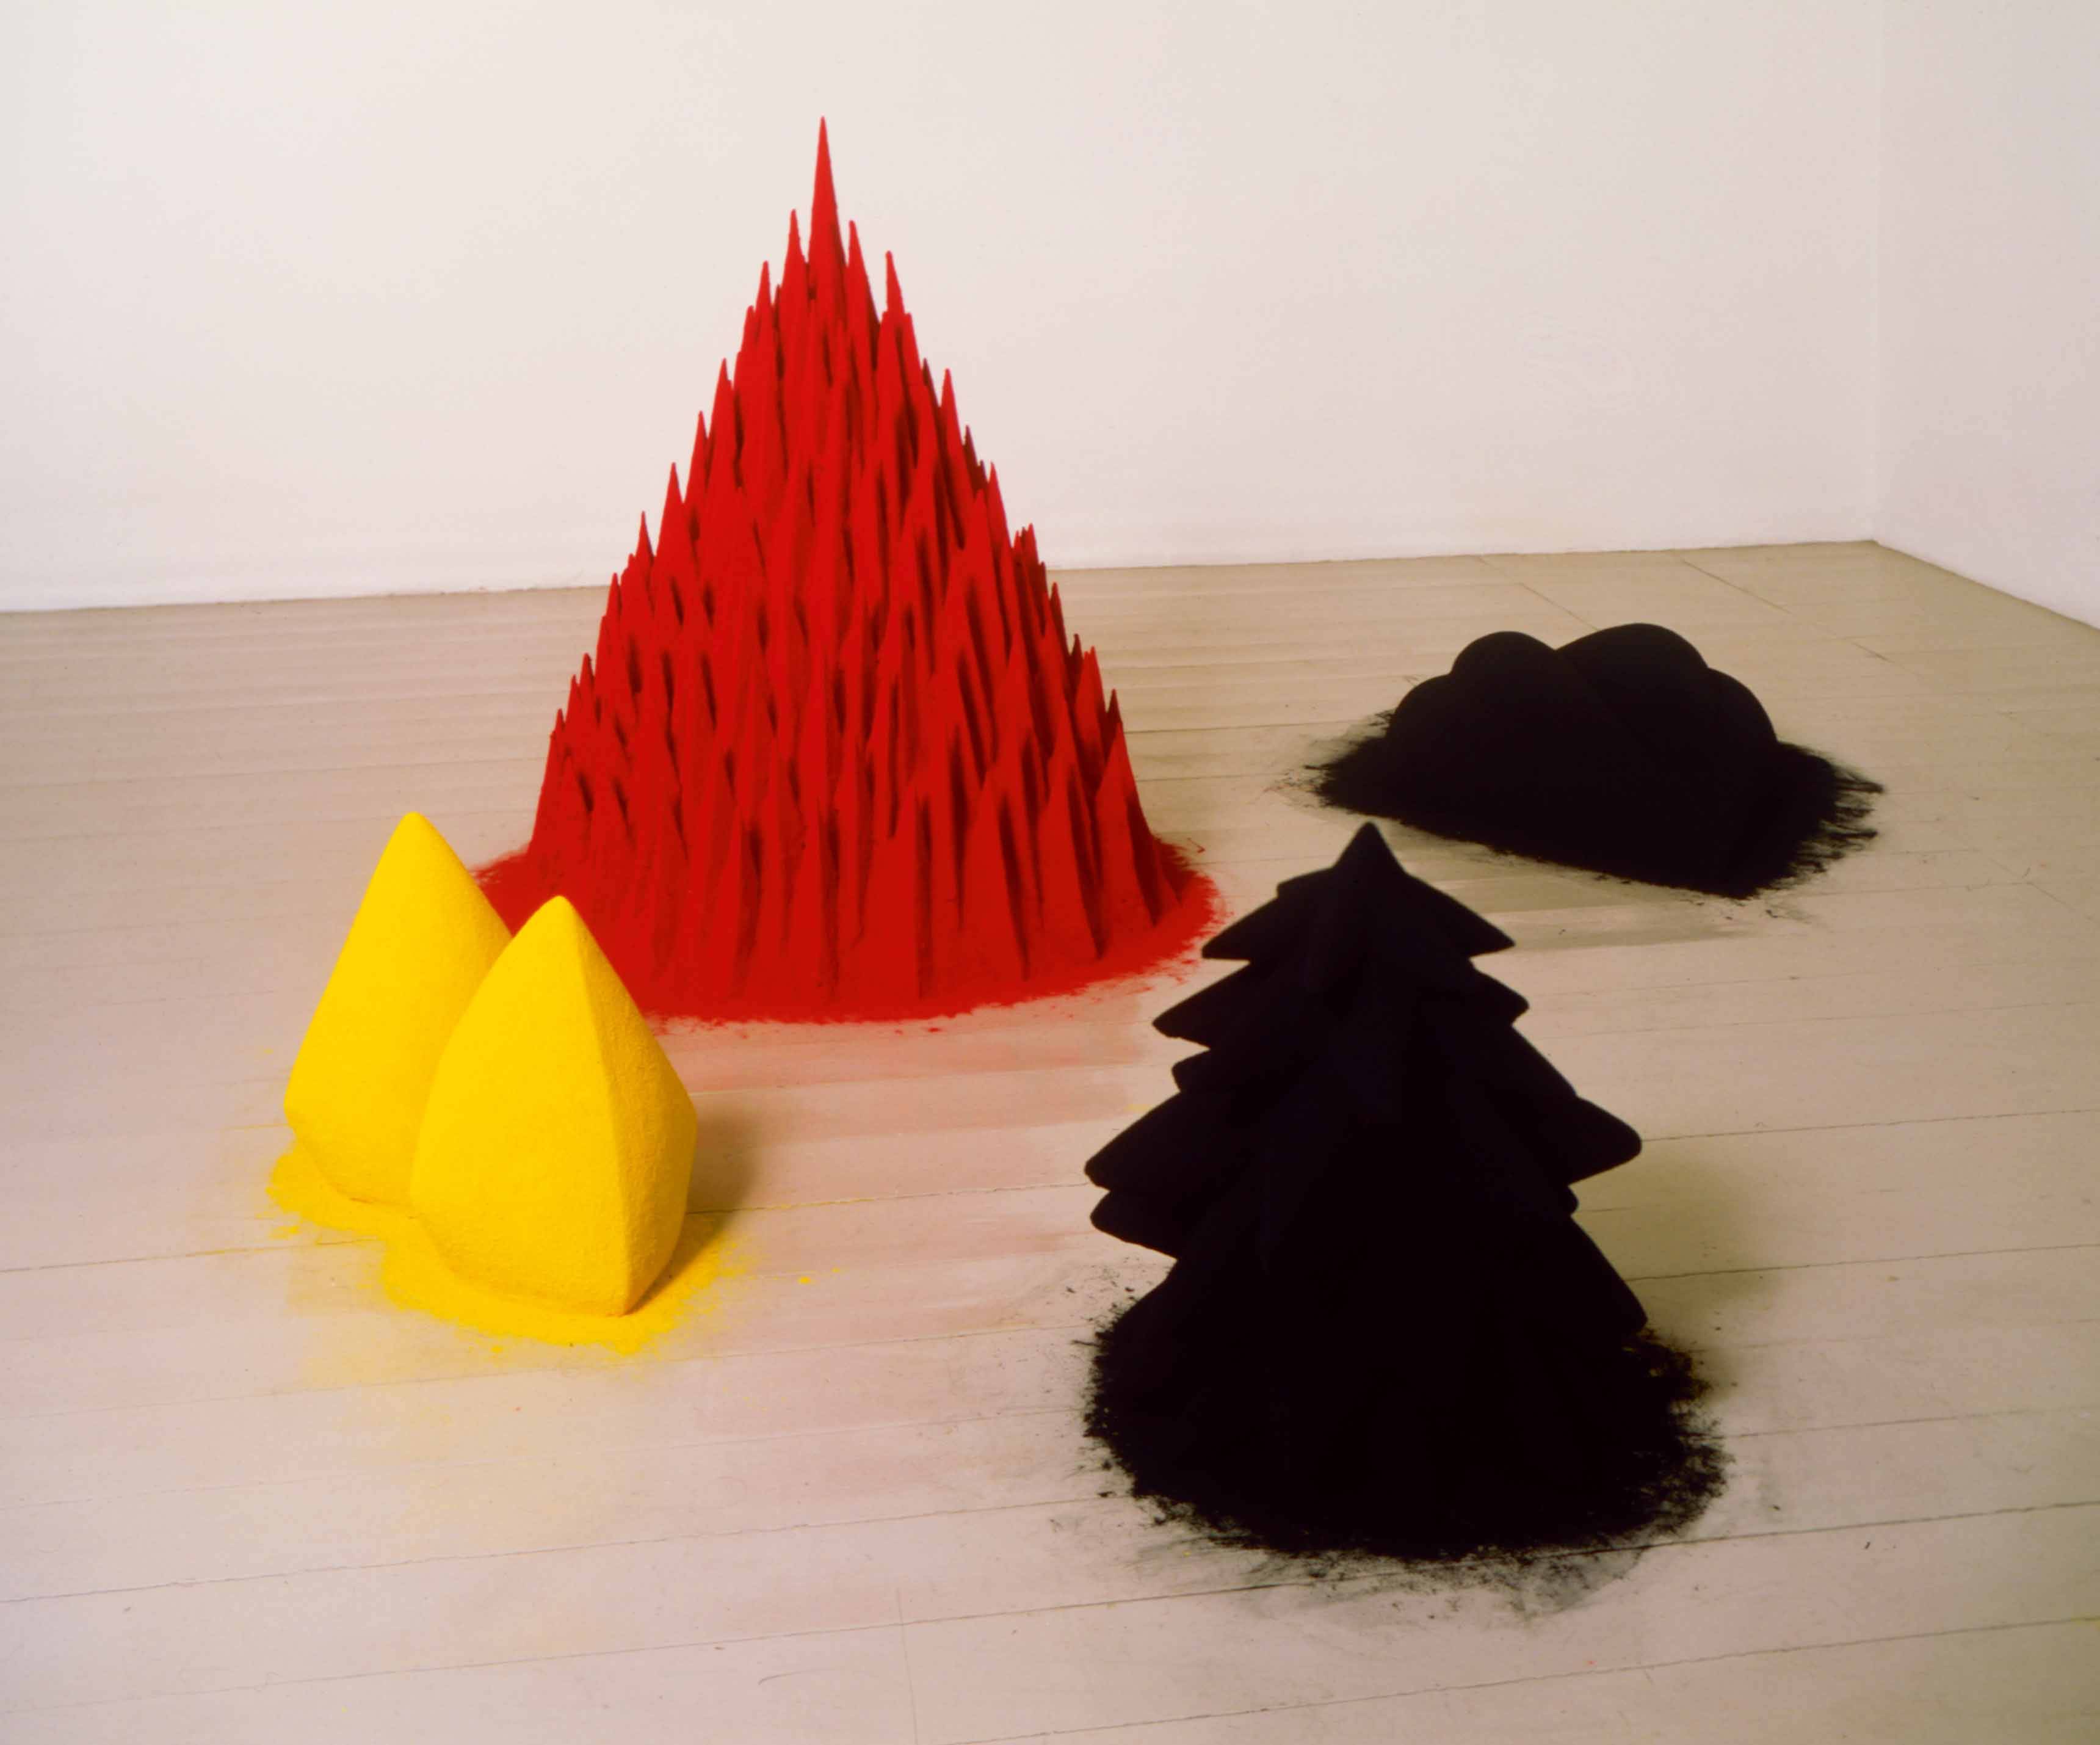 “White Sand, Red Millet, Many Flowers” (1982) d'Anish Kapoor, Techniques mixtes, 101 x 241,5 x 217,4 cm